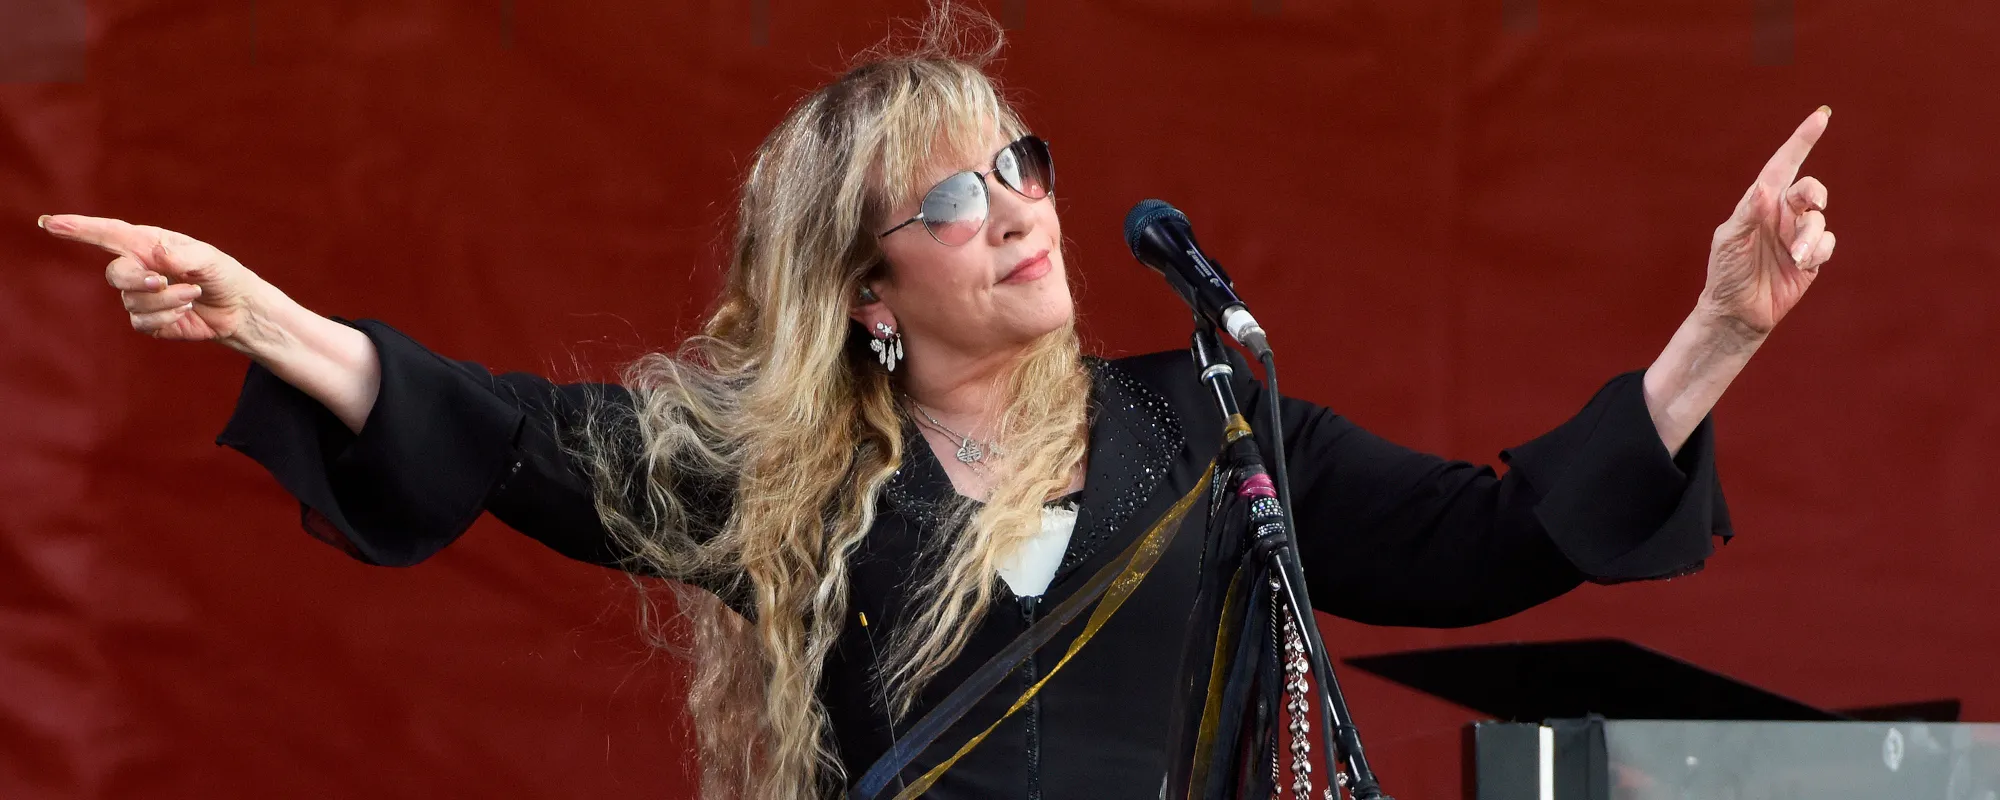 7 Albums You Didn’t Know Feature Stevie Nicks